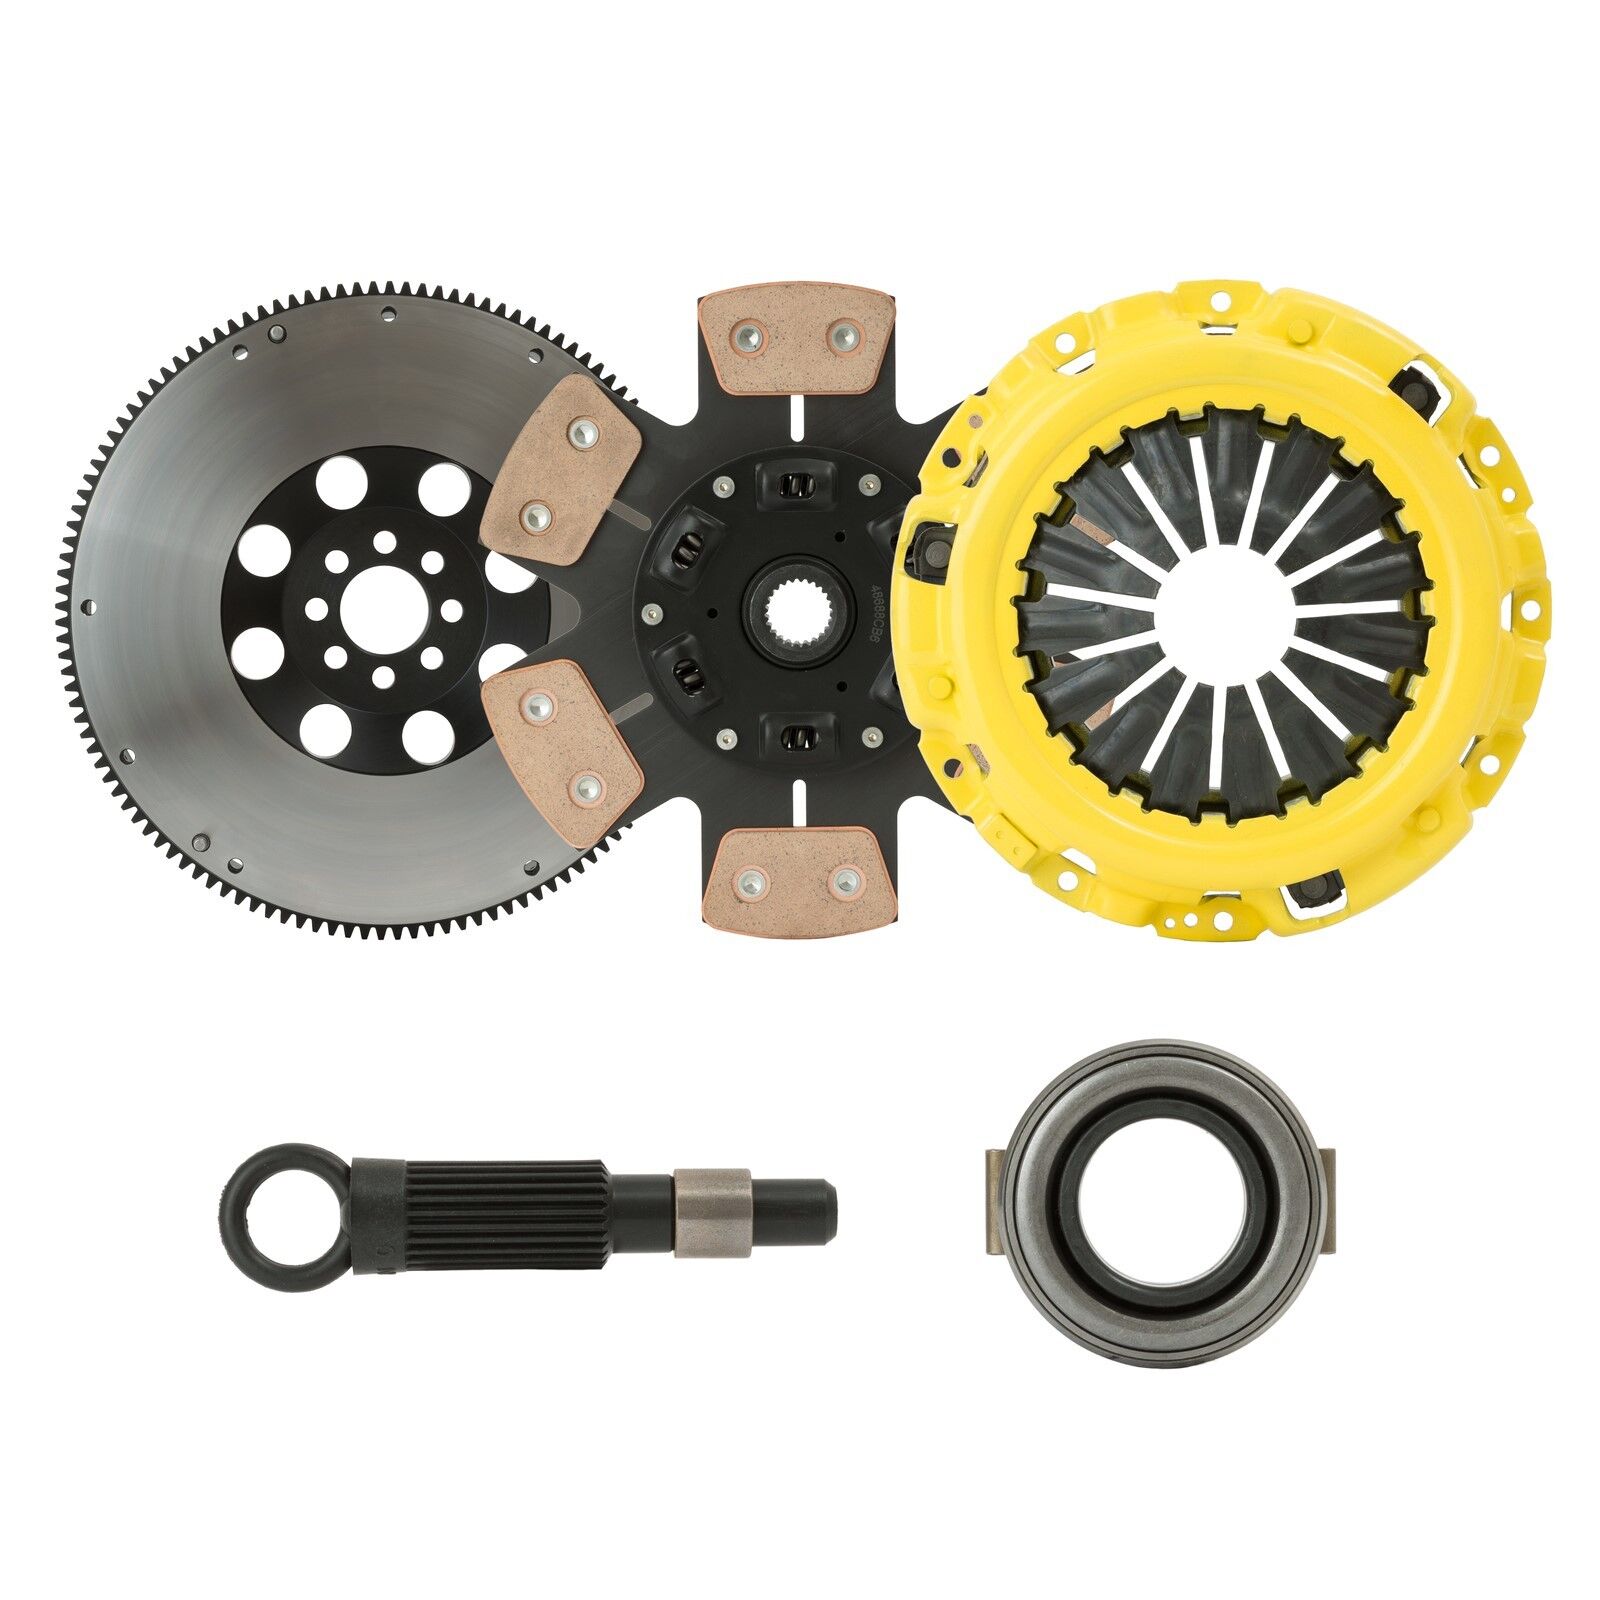 STAGE 3 CLUTCH KIT+10LBS FLYWHEEL fits 06-15 HONDA CIVIC Si K20 6-SPEED by CXP